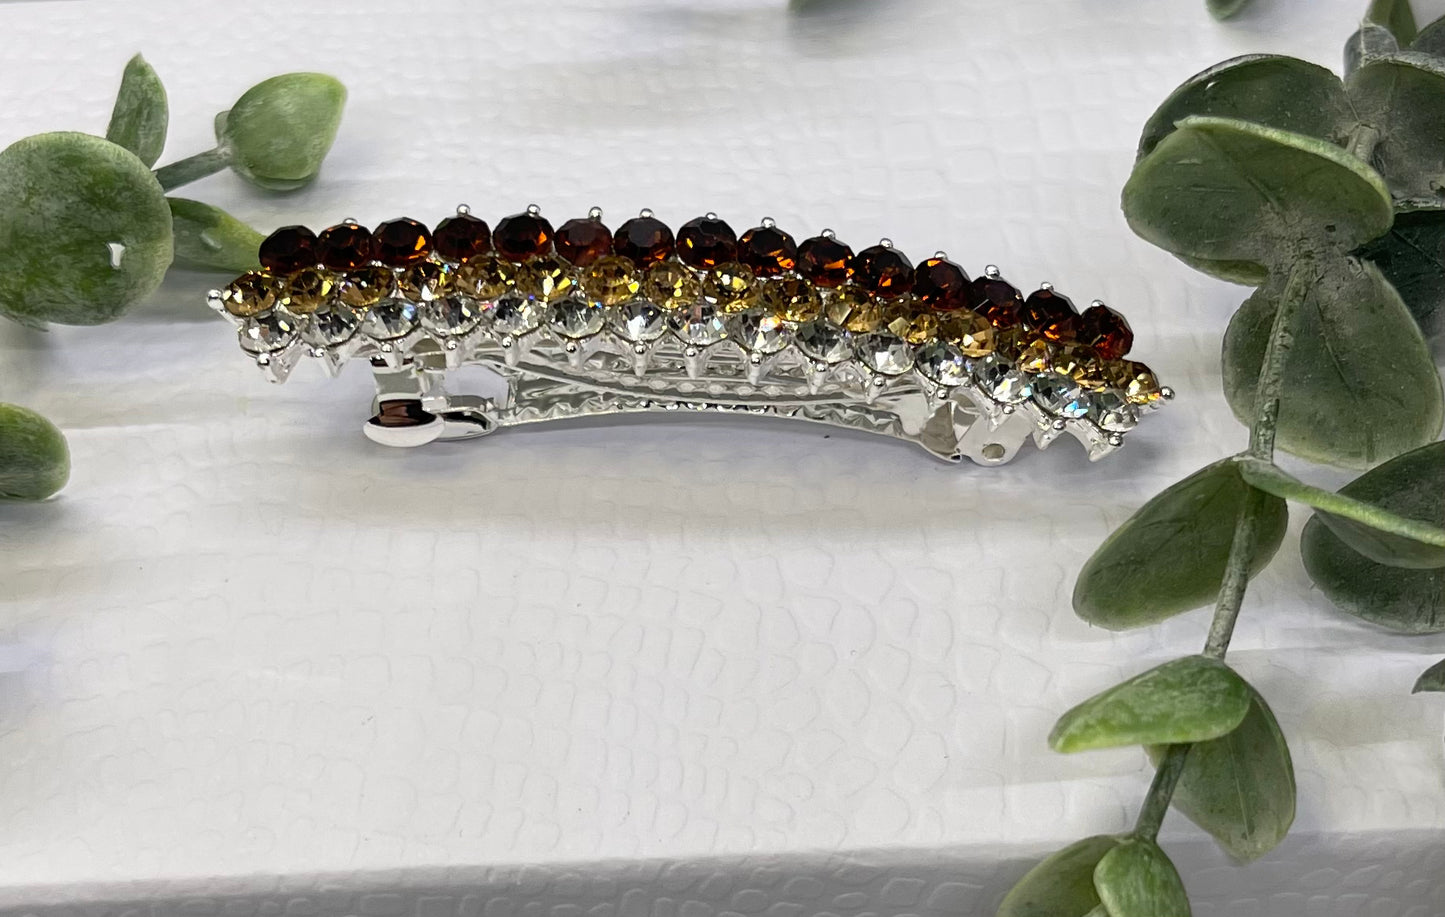 Brown Crystal rhinestone barrette approximately 3.0” sinverted tone formal hair accessories gift wedding